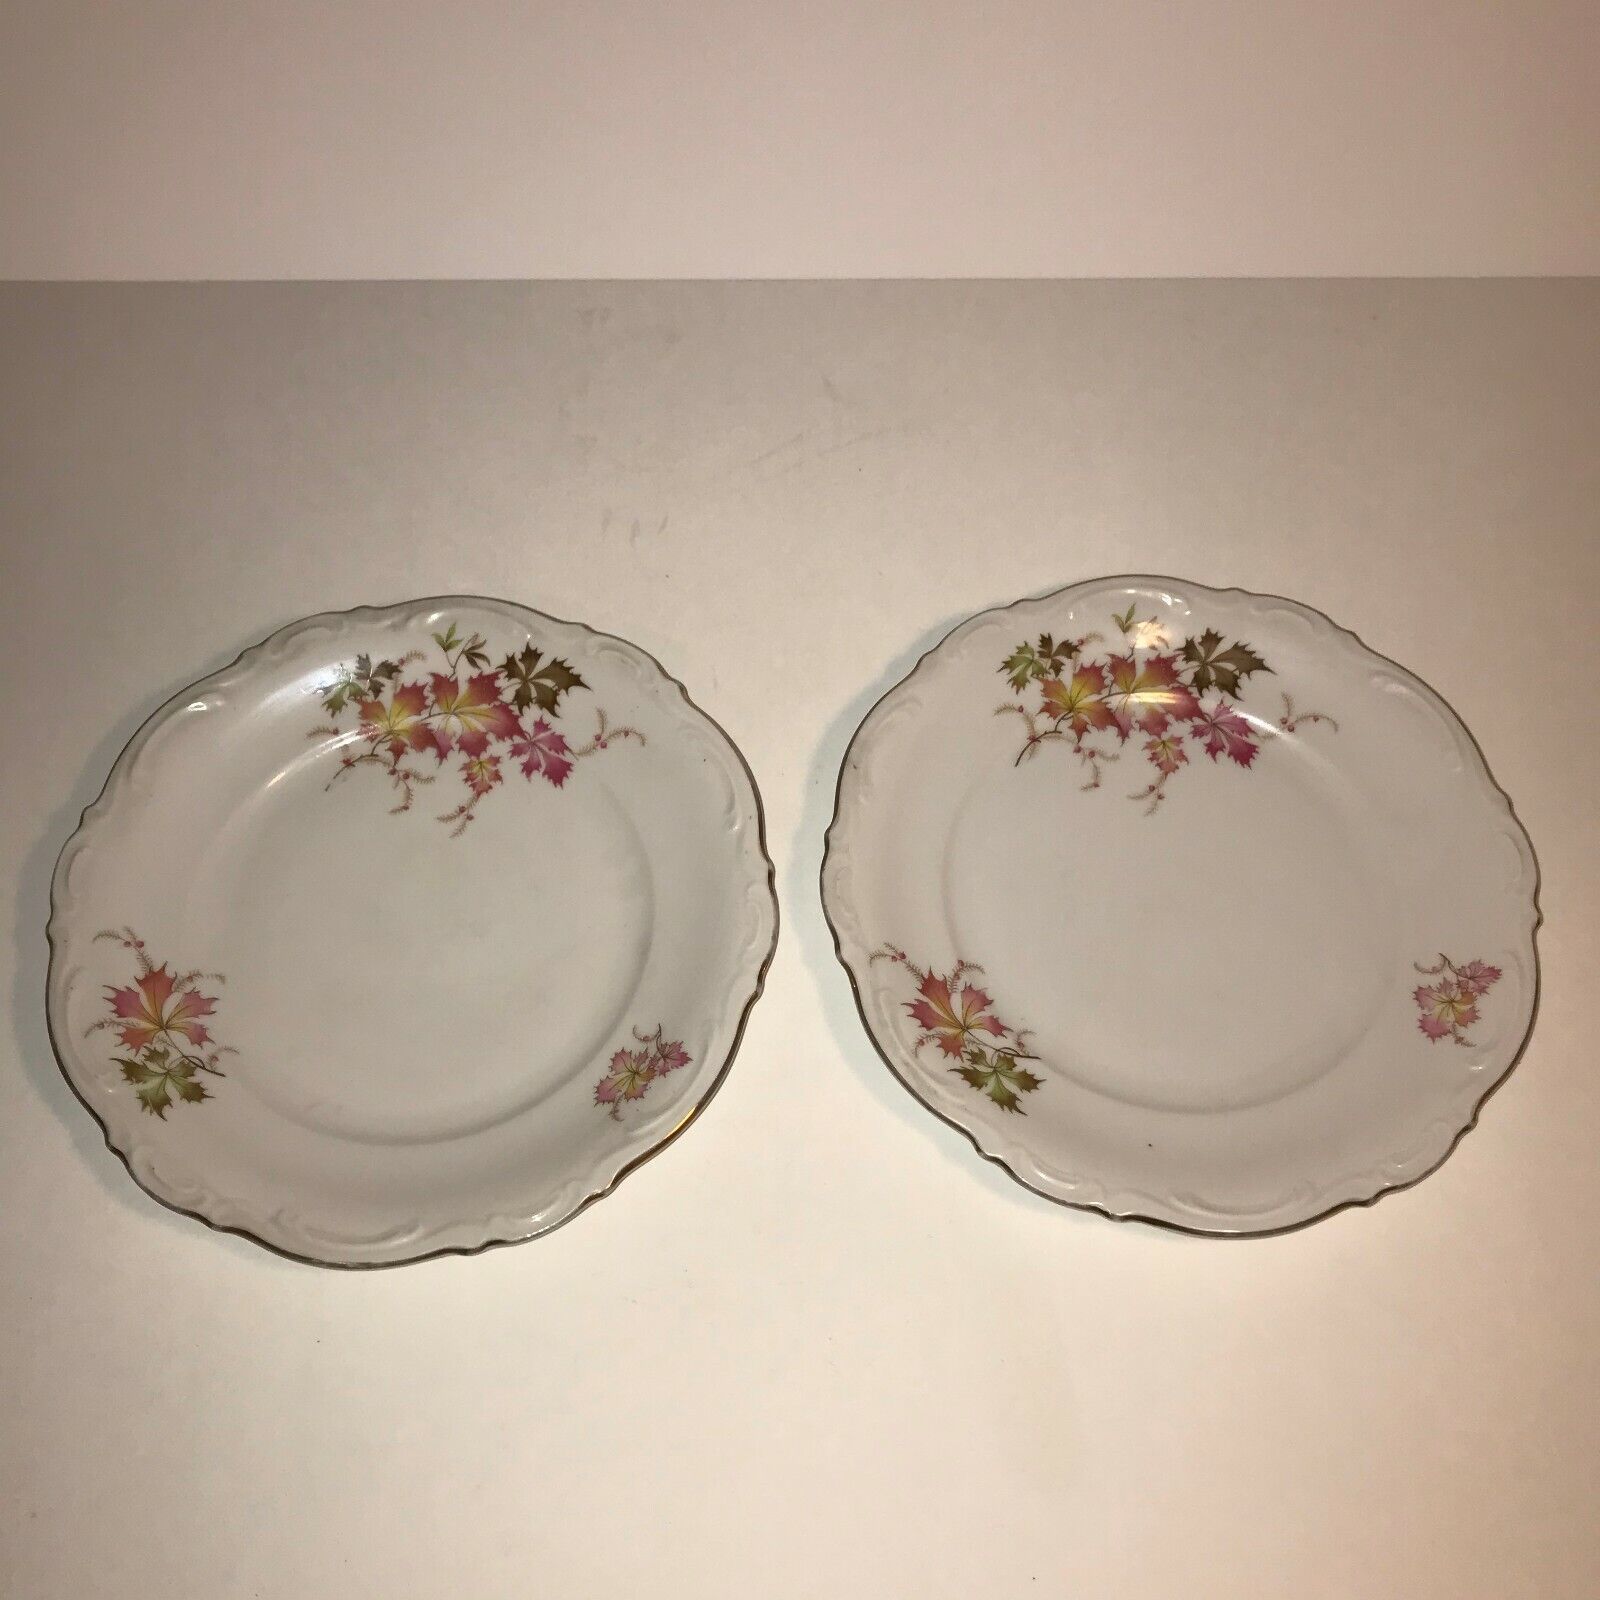 Primary image for Two (2) Mitterteich Bavaria Autumn Seasonal Salad Plates 7 3/4" Made in Germany